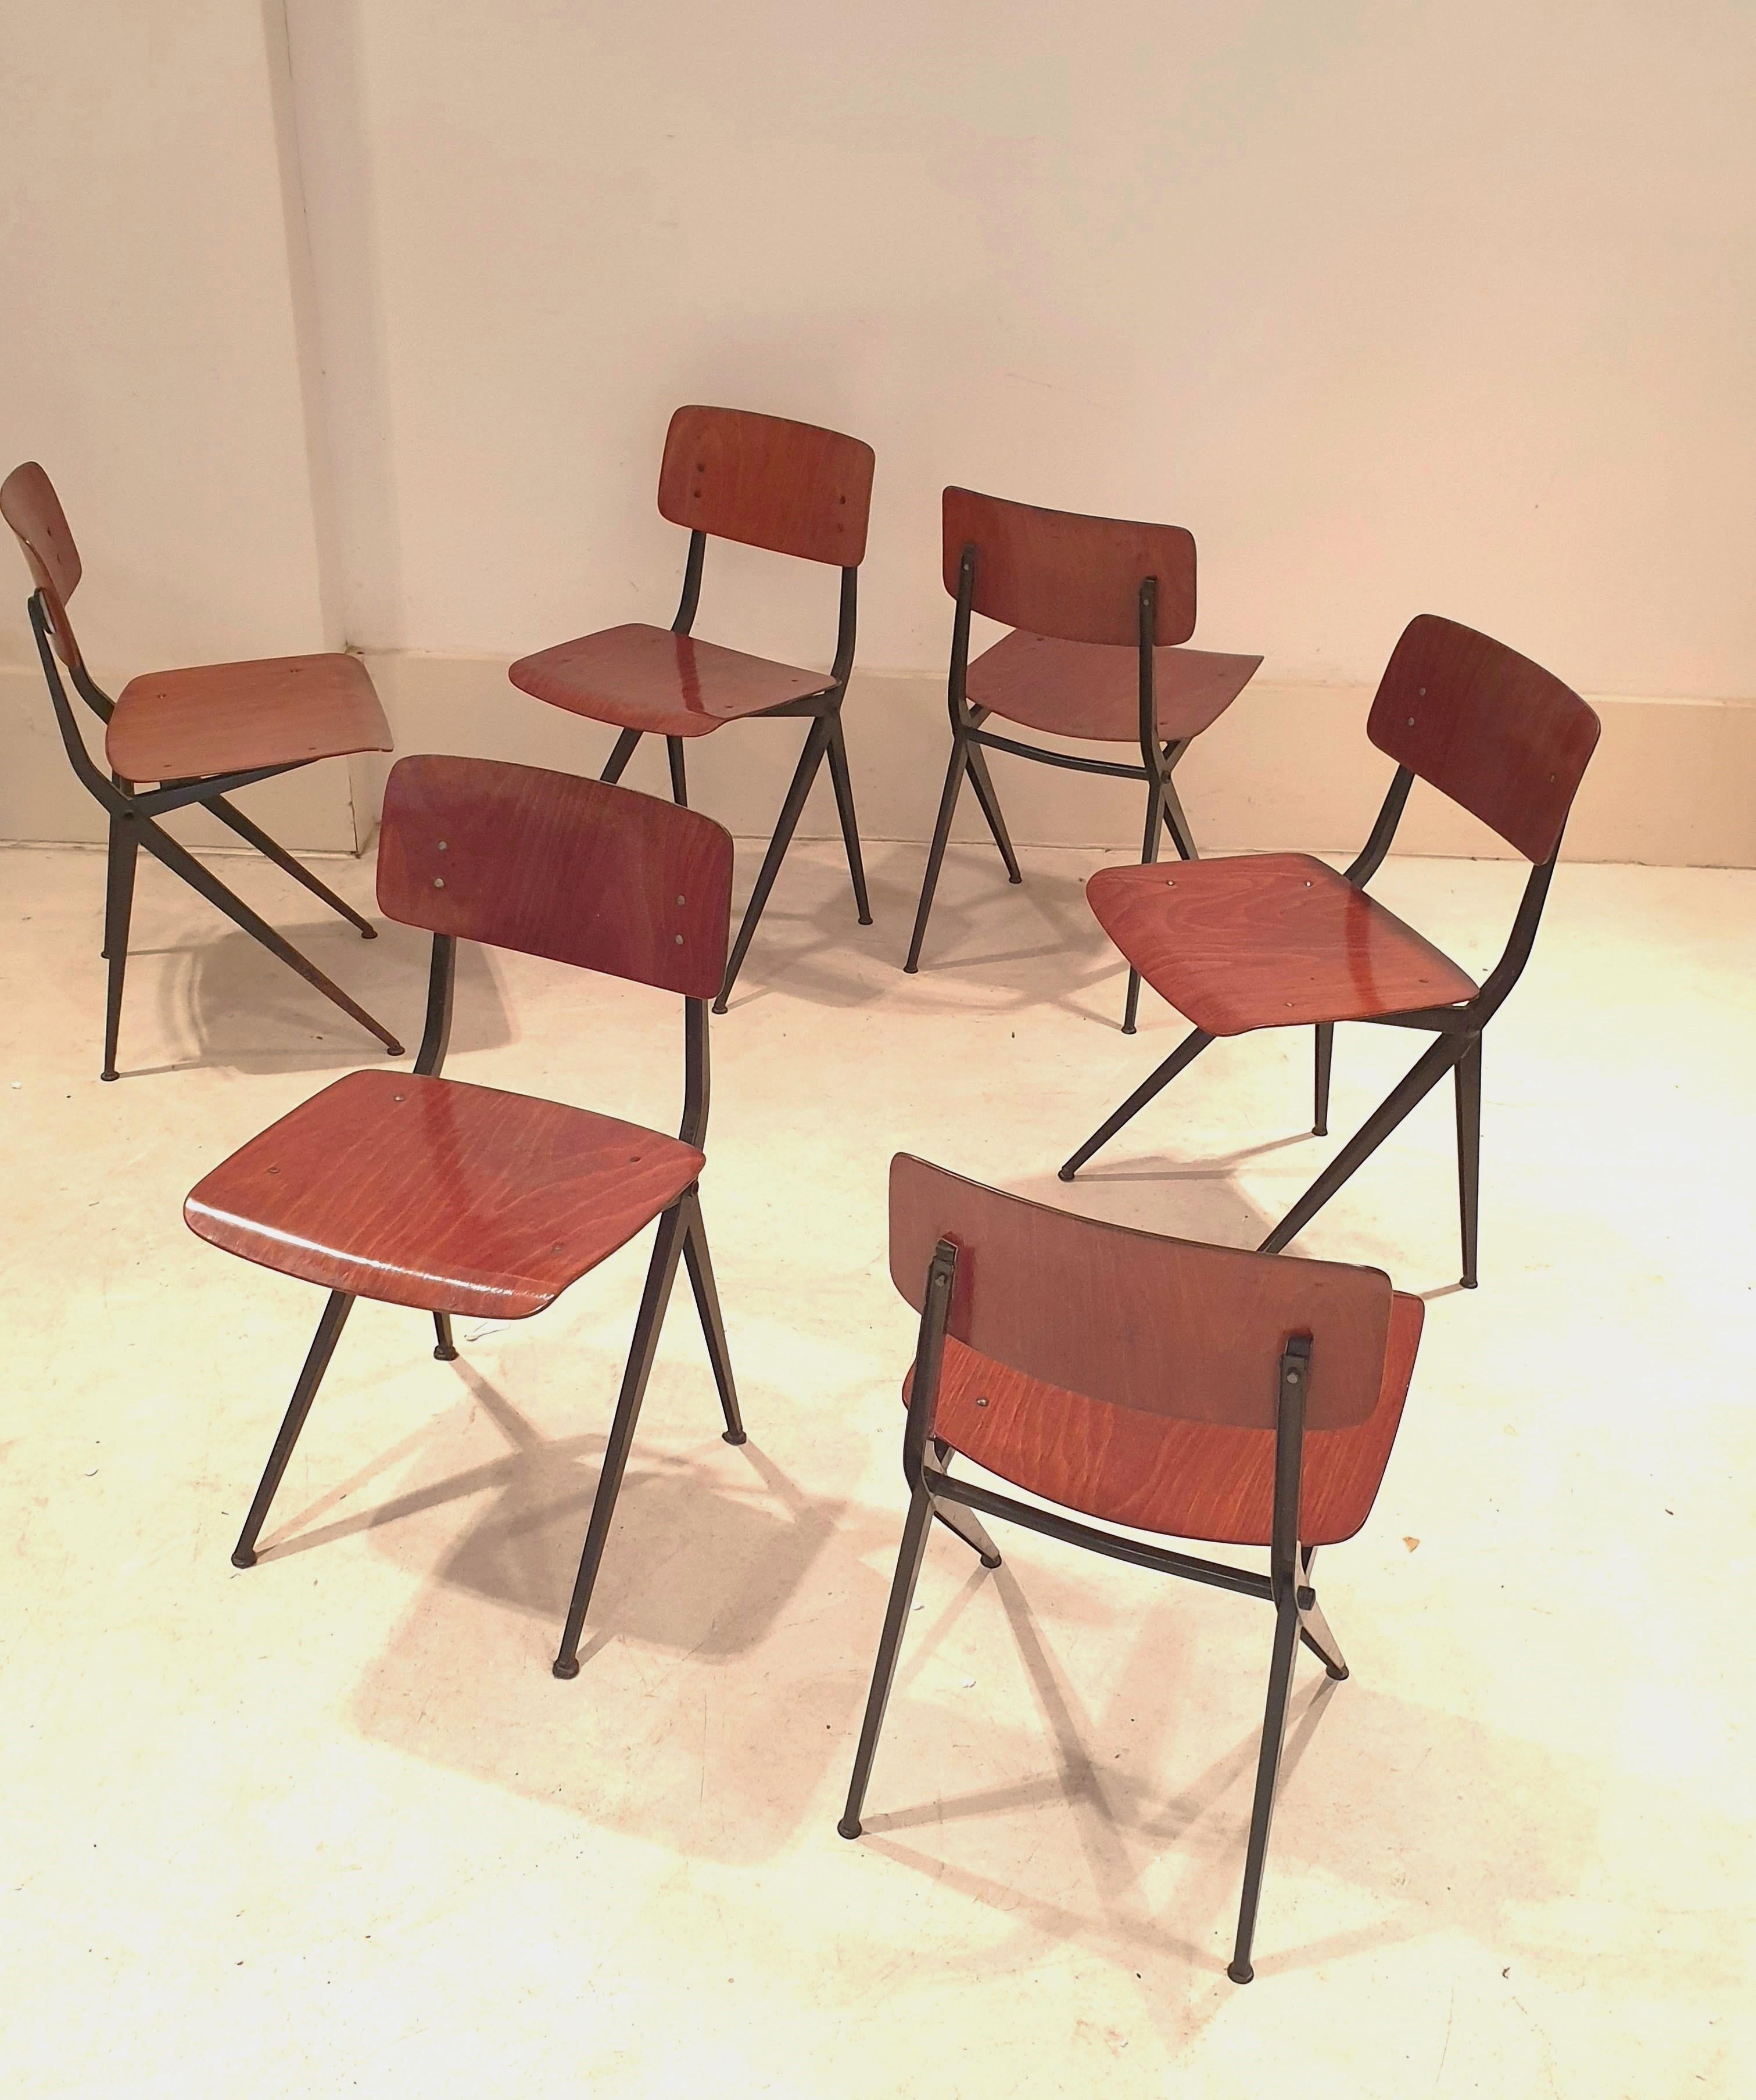 Set of 6 industrial style chairs by Marko Holland. This comfortable utilitarian chairs have beautiful aged teak seats and backs and black lacquered metal minimalist frames. Their simplicity mean they would fit into any decorative scheme and their